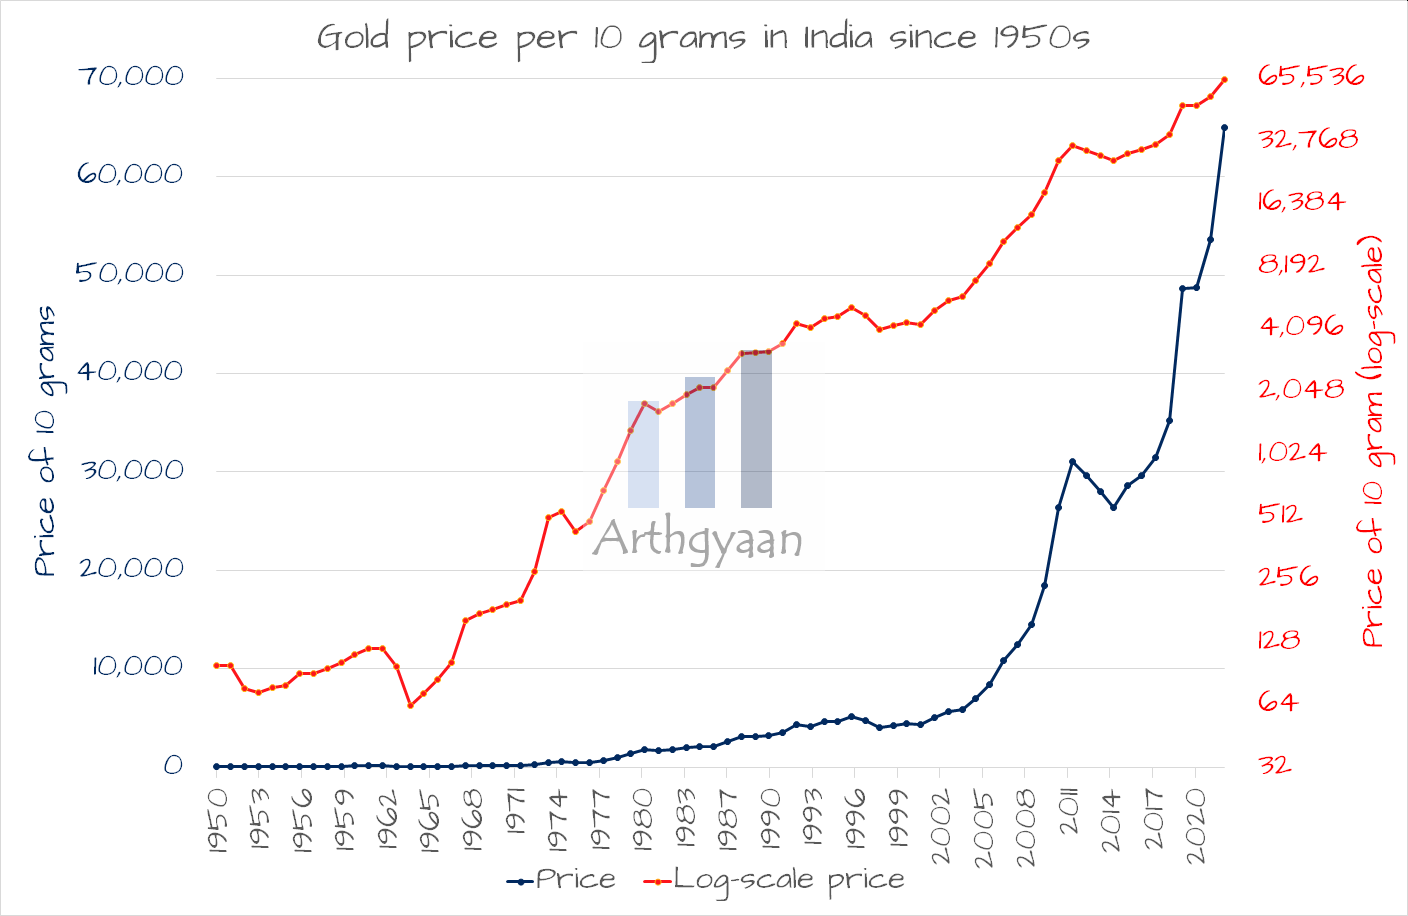 Gold price per 10 grams in India since 1950s